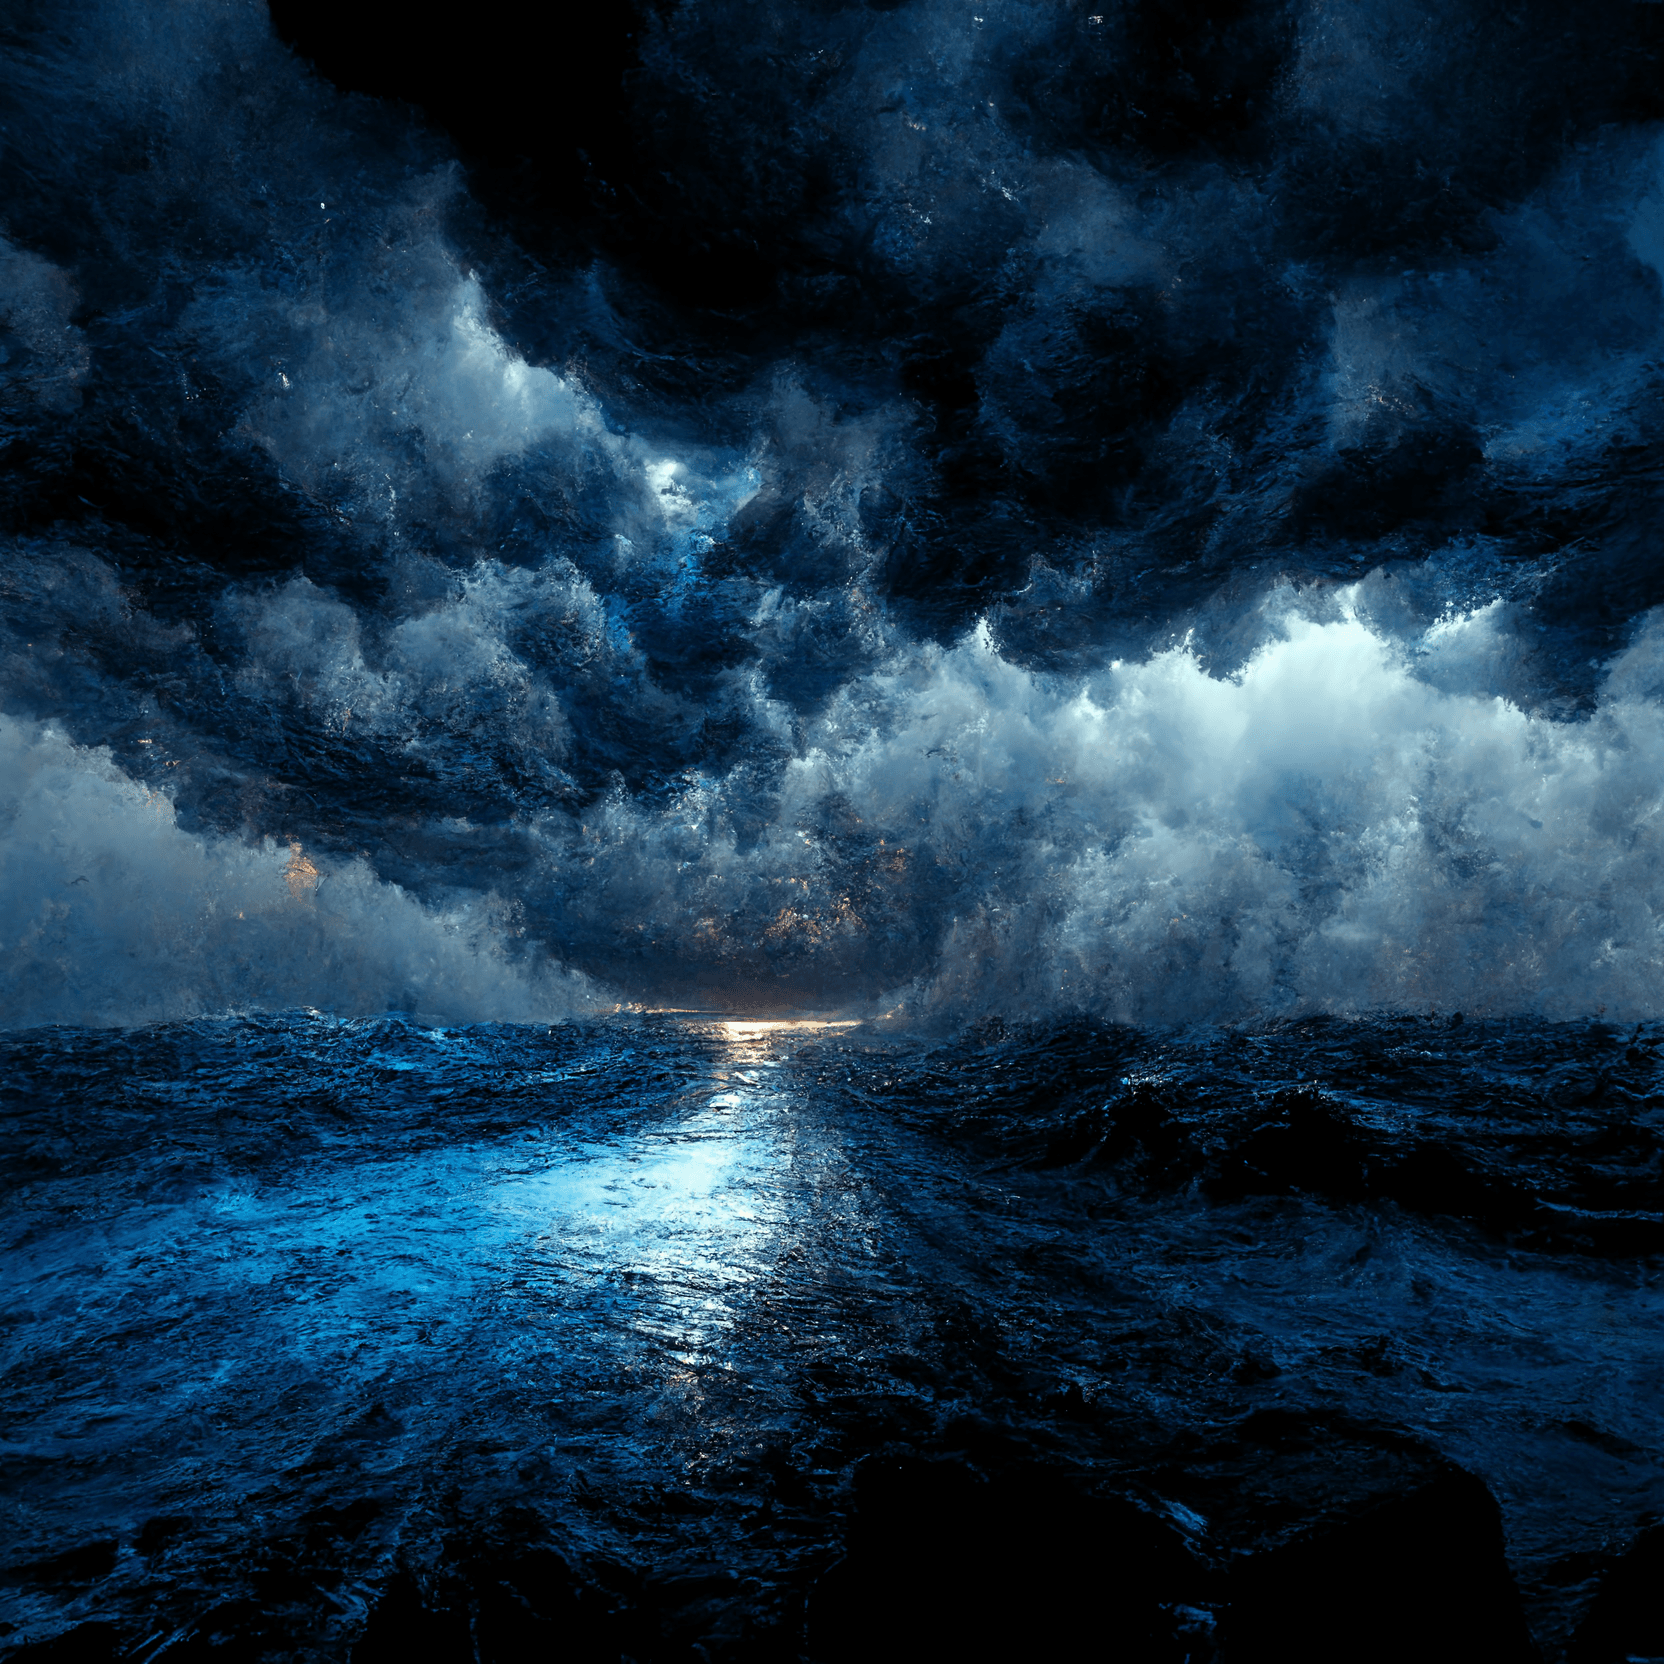 Pathway Through The Storm